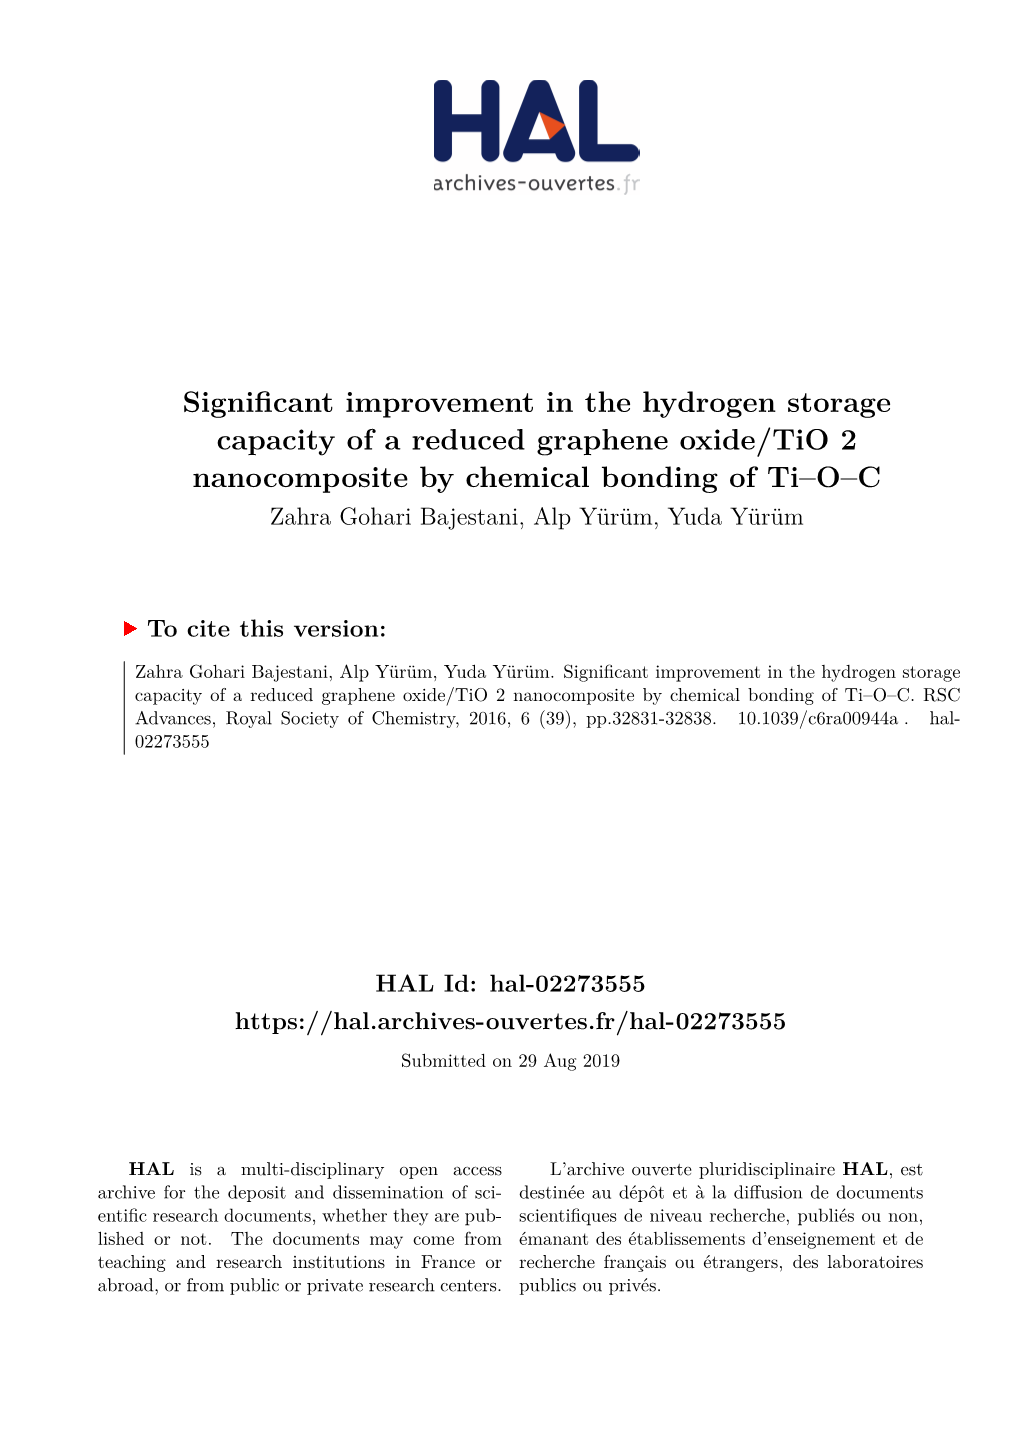 Significant Improvement in the Hydrogen Storage Capacity of A